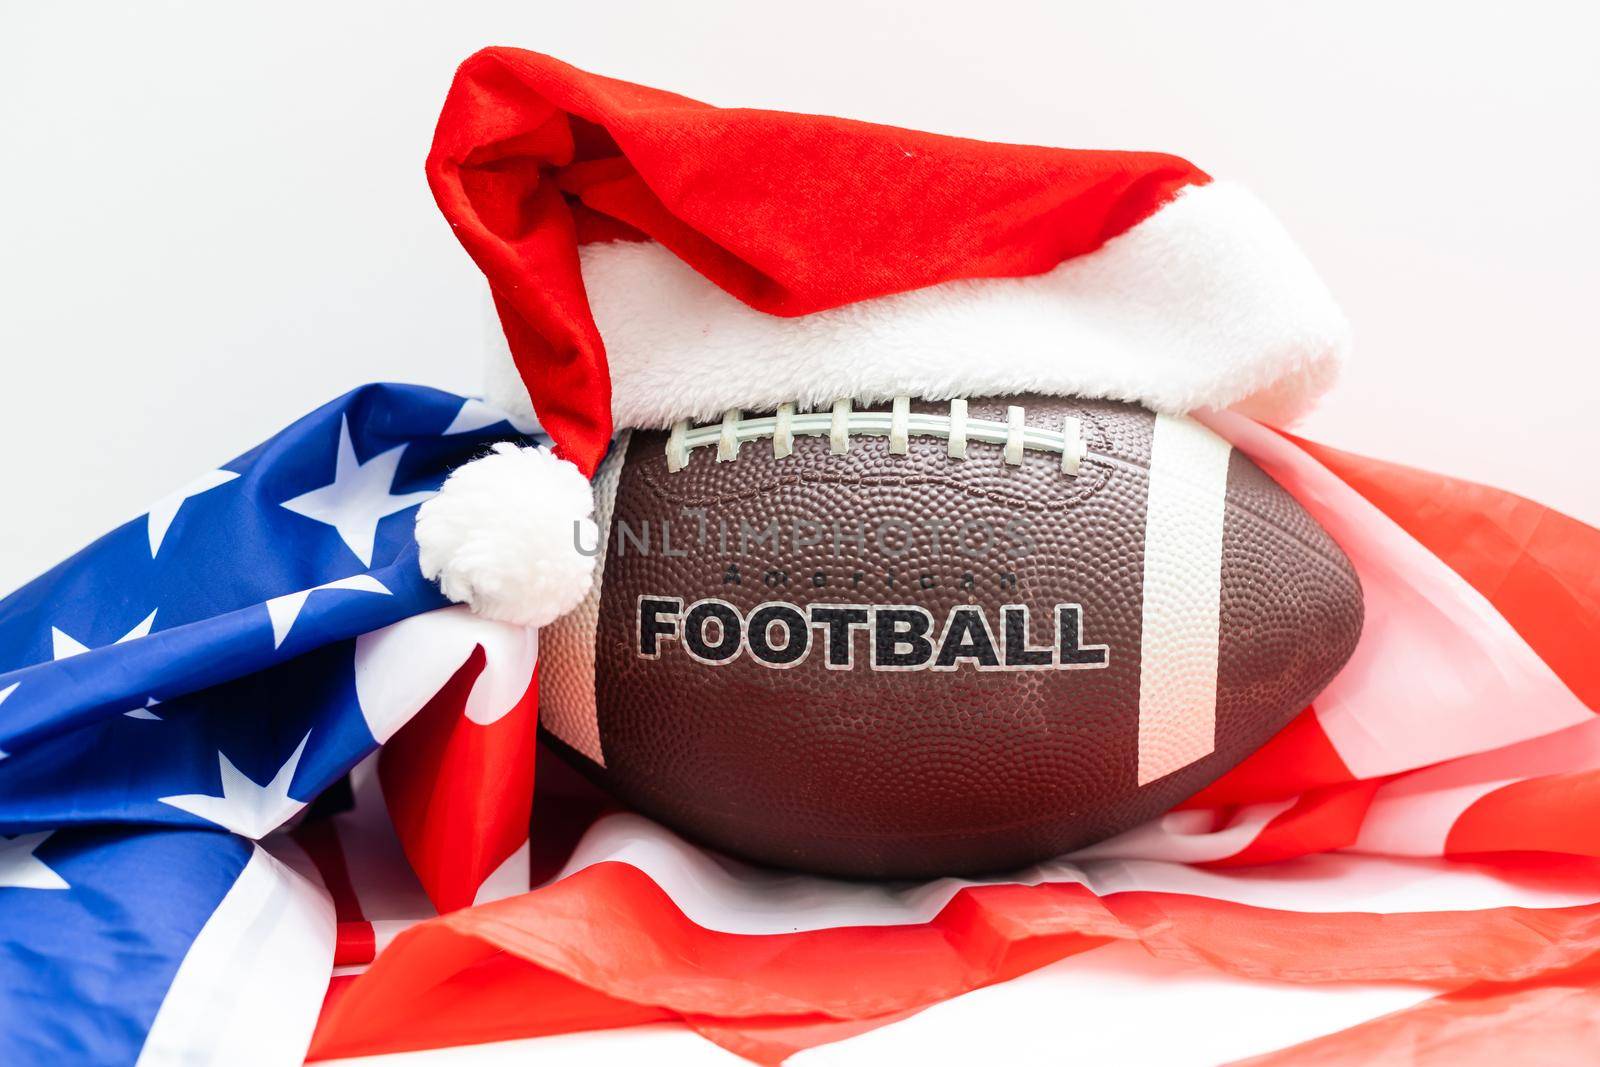 A souvenir ball for rugby or american football in a red santa claus hat on a green background. Preparation for design of tickets, posters, postcards or business cards on the subject of the sports